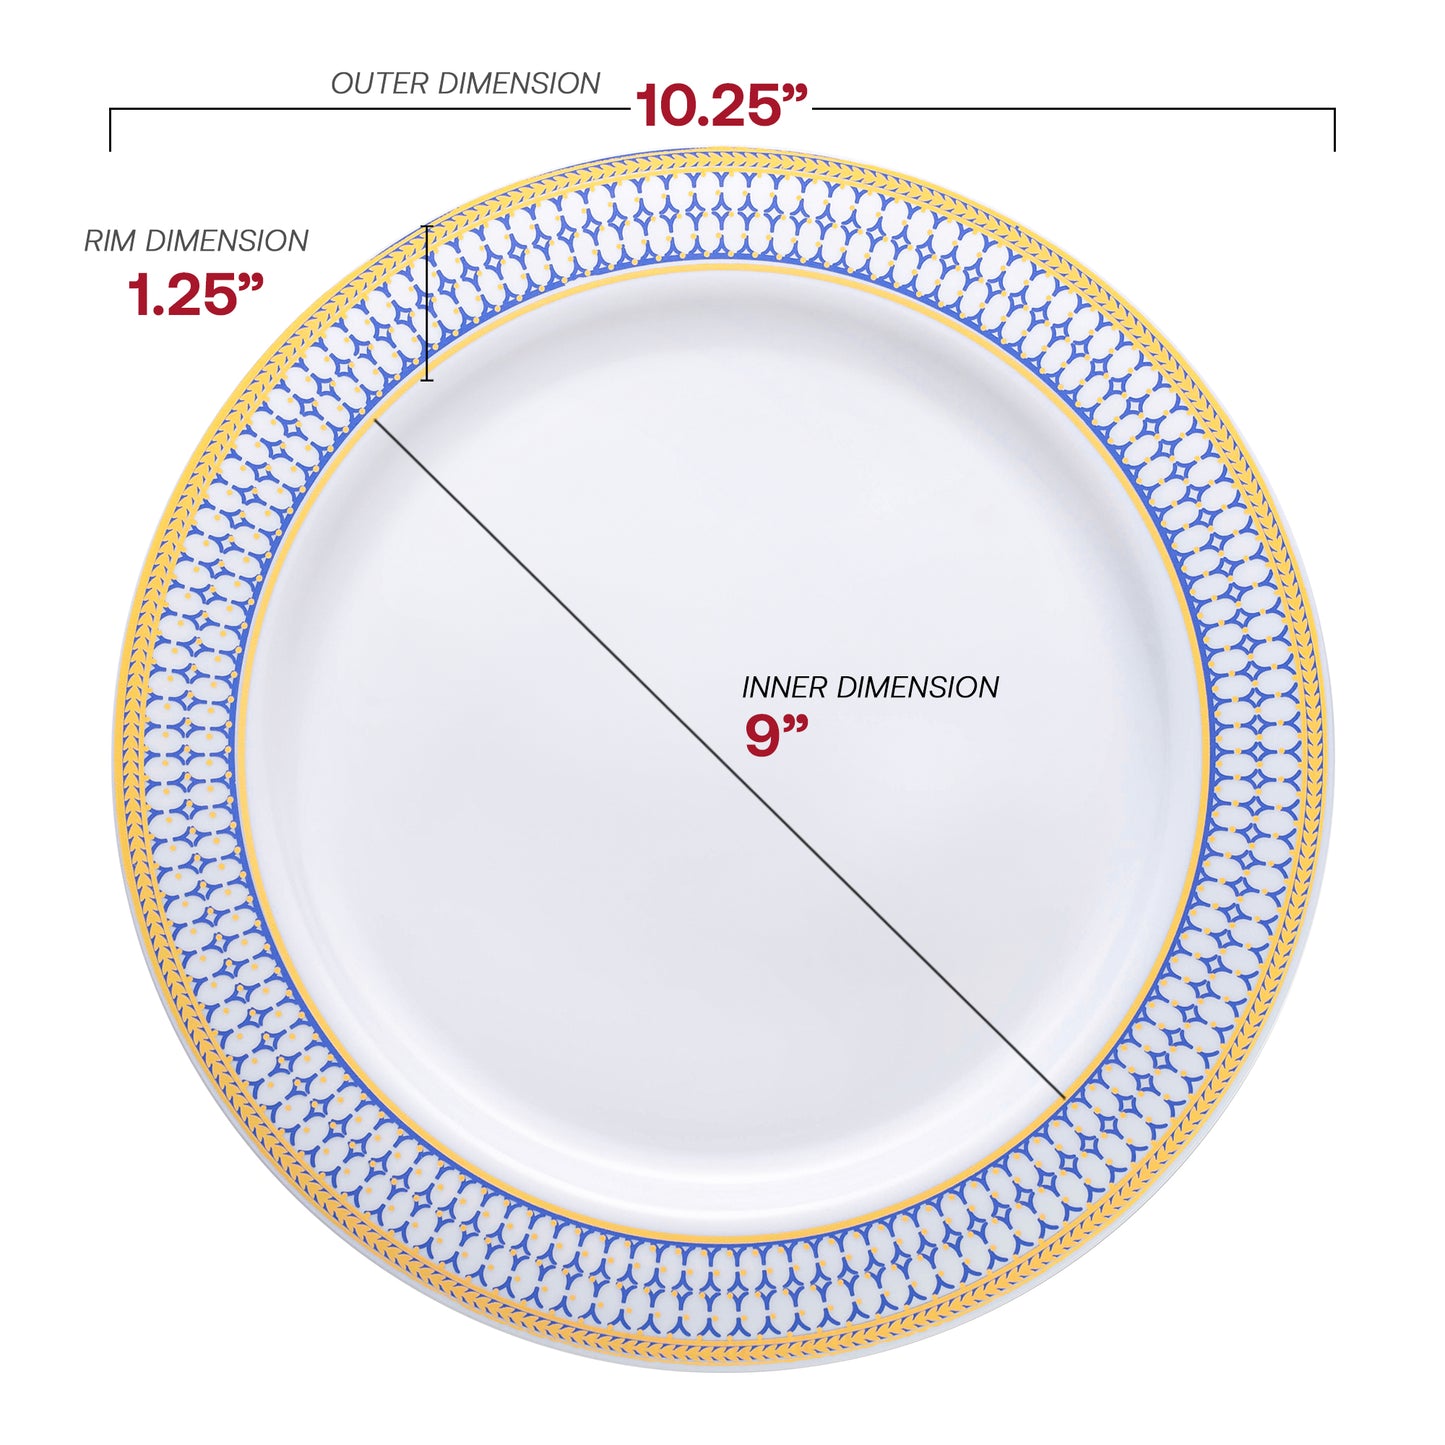 White with Blue and Gold Chord Rim Plastic Dinner Plates (10.25") Dimension | The Kaya Collection